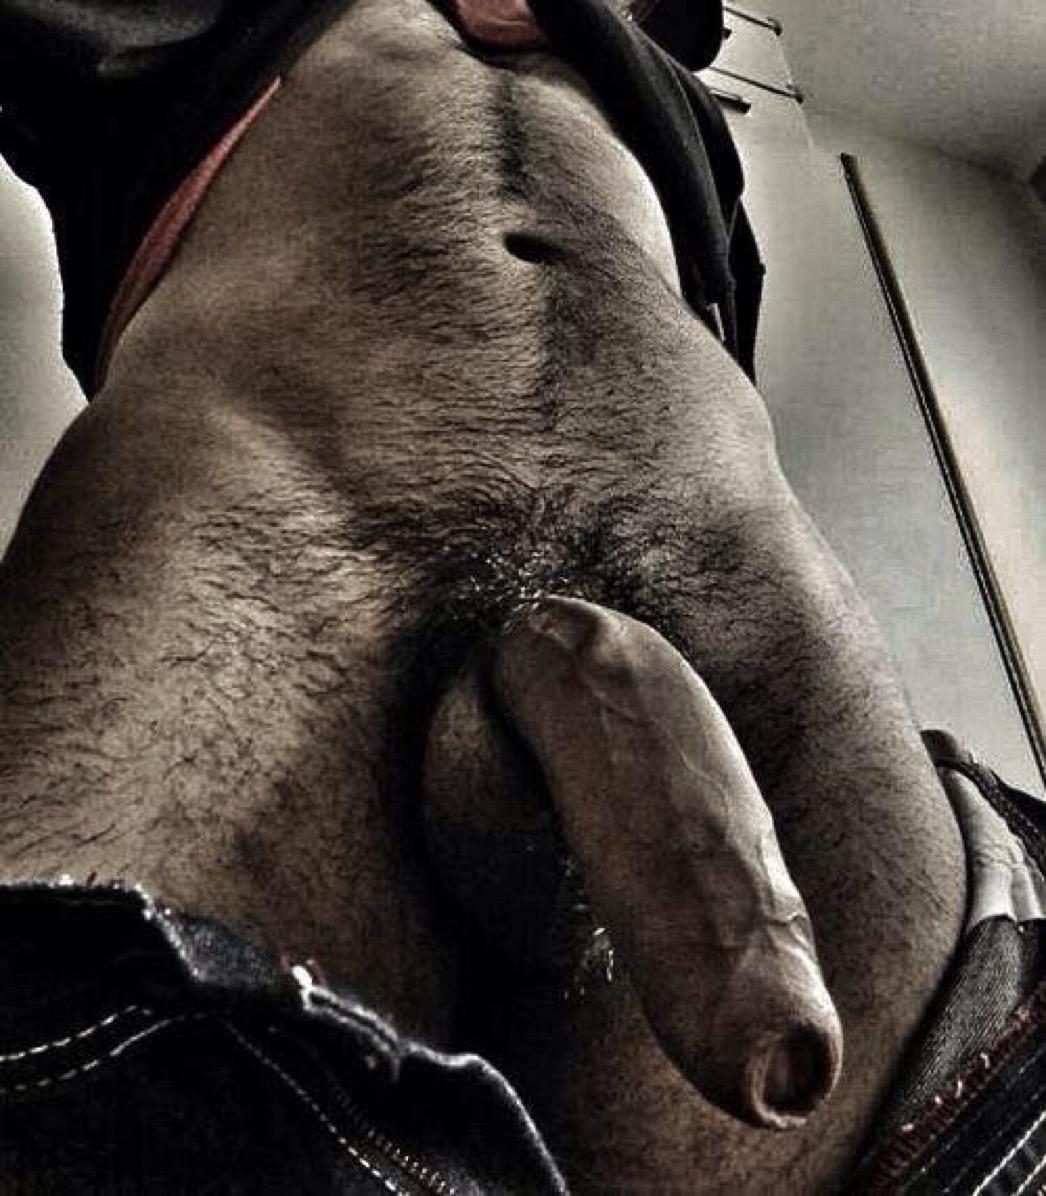 BB Boi on Twitter: "Love my tongue in that skin http://t.co/vyGZf85IjT...